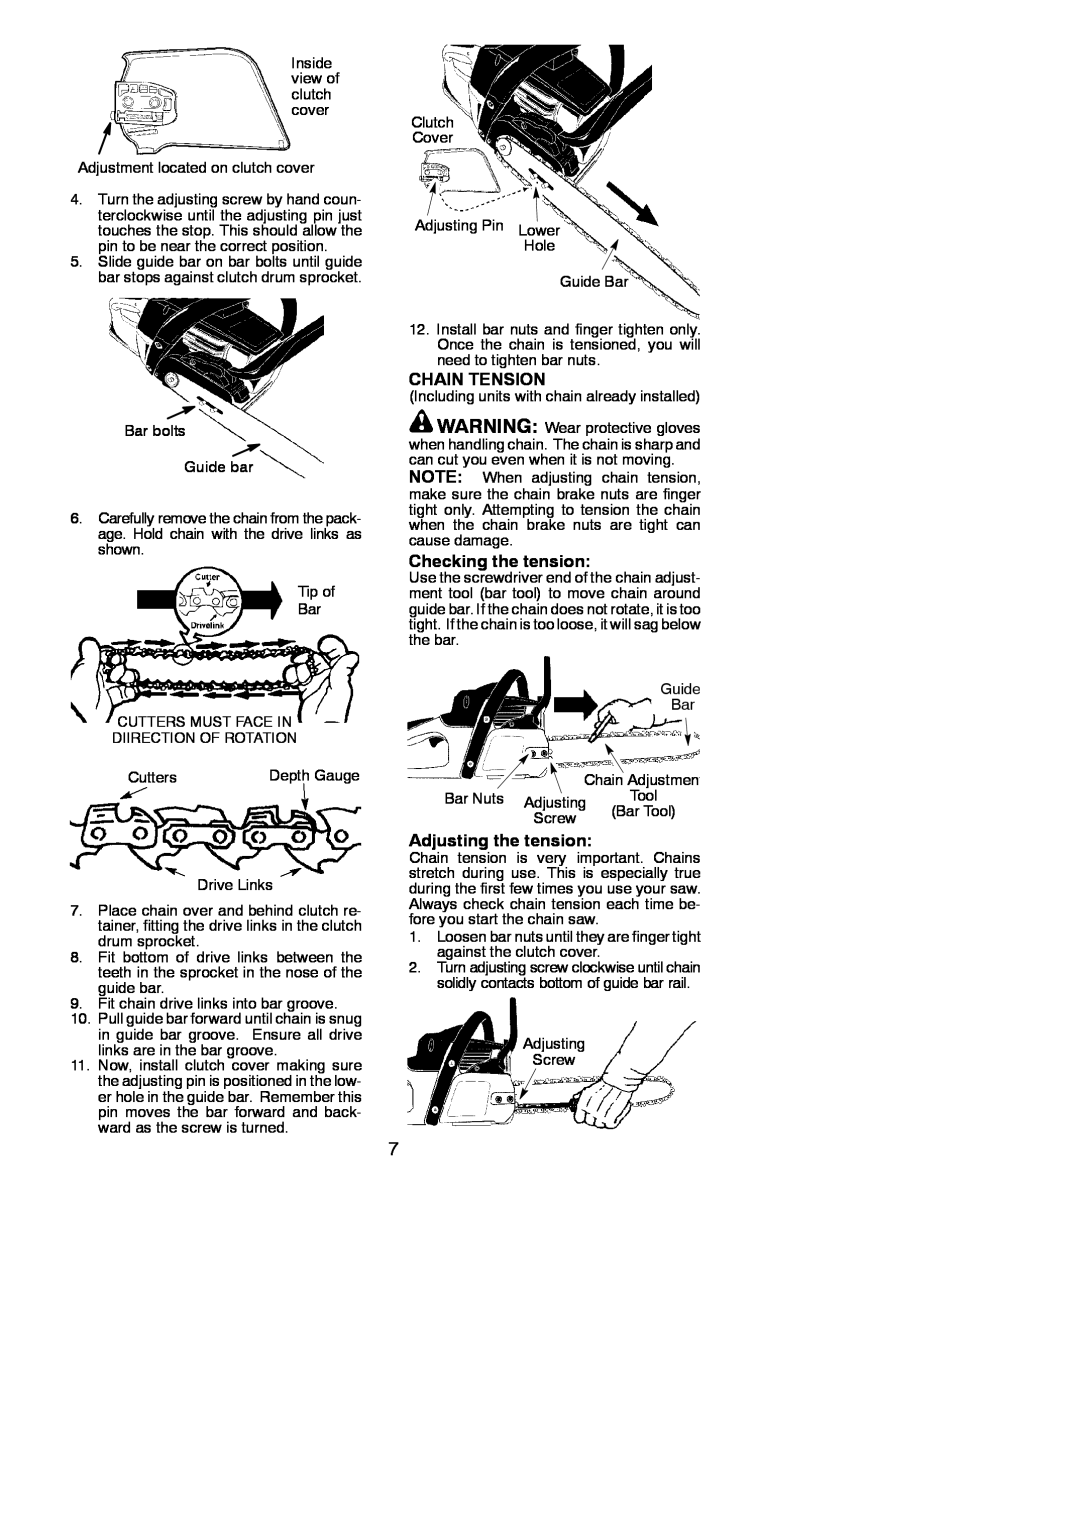 Poulan 115156426, PP3416 instruction manual Chain Tension, Checking the tension, Adjusting the tension 